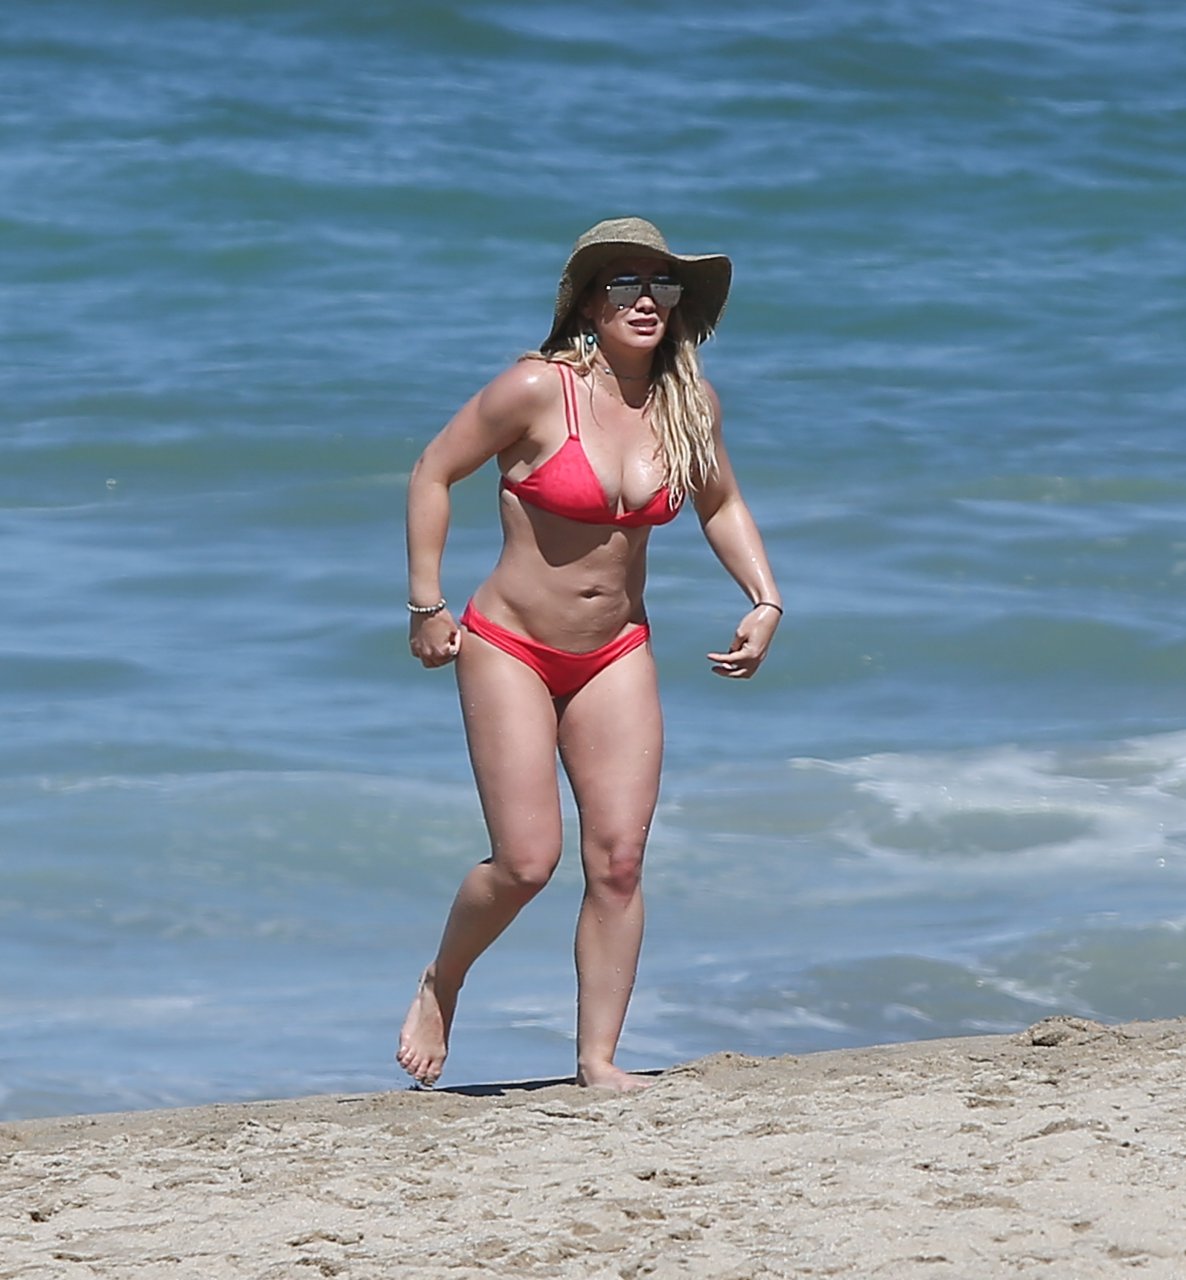 Thefappening Pw Hillary Duff Thefappening Pm Celebrity Photo Leaks